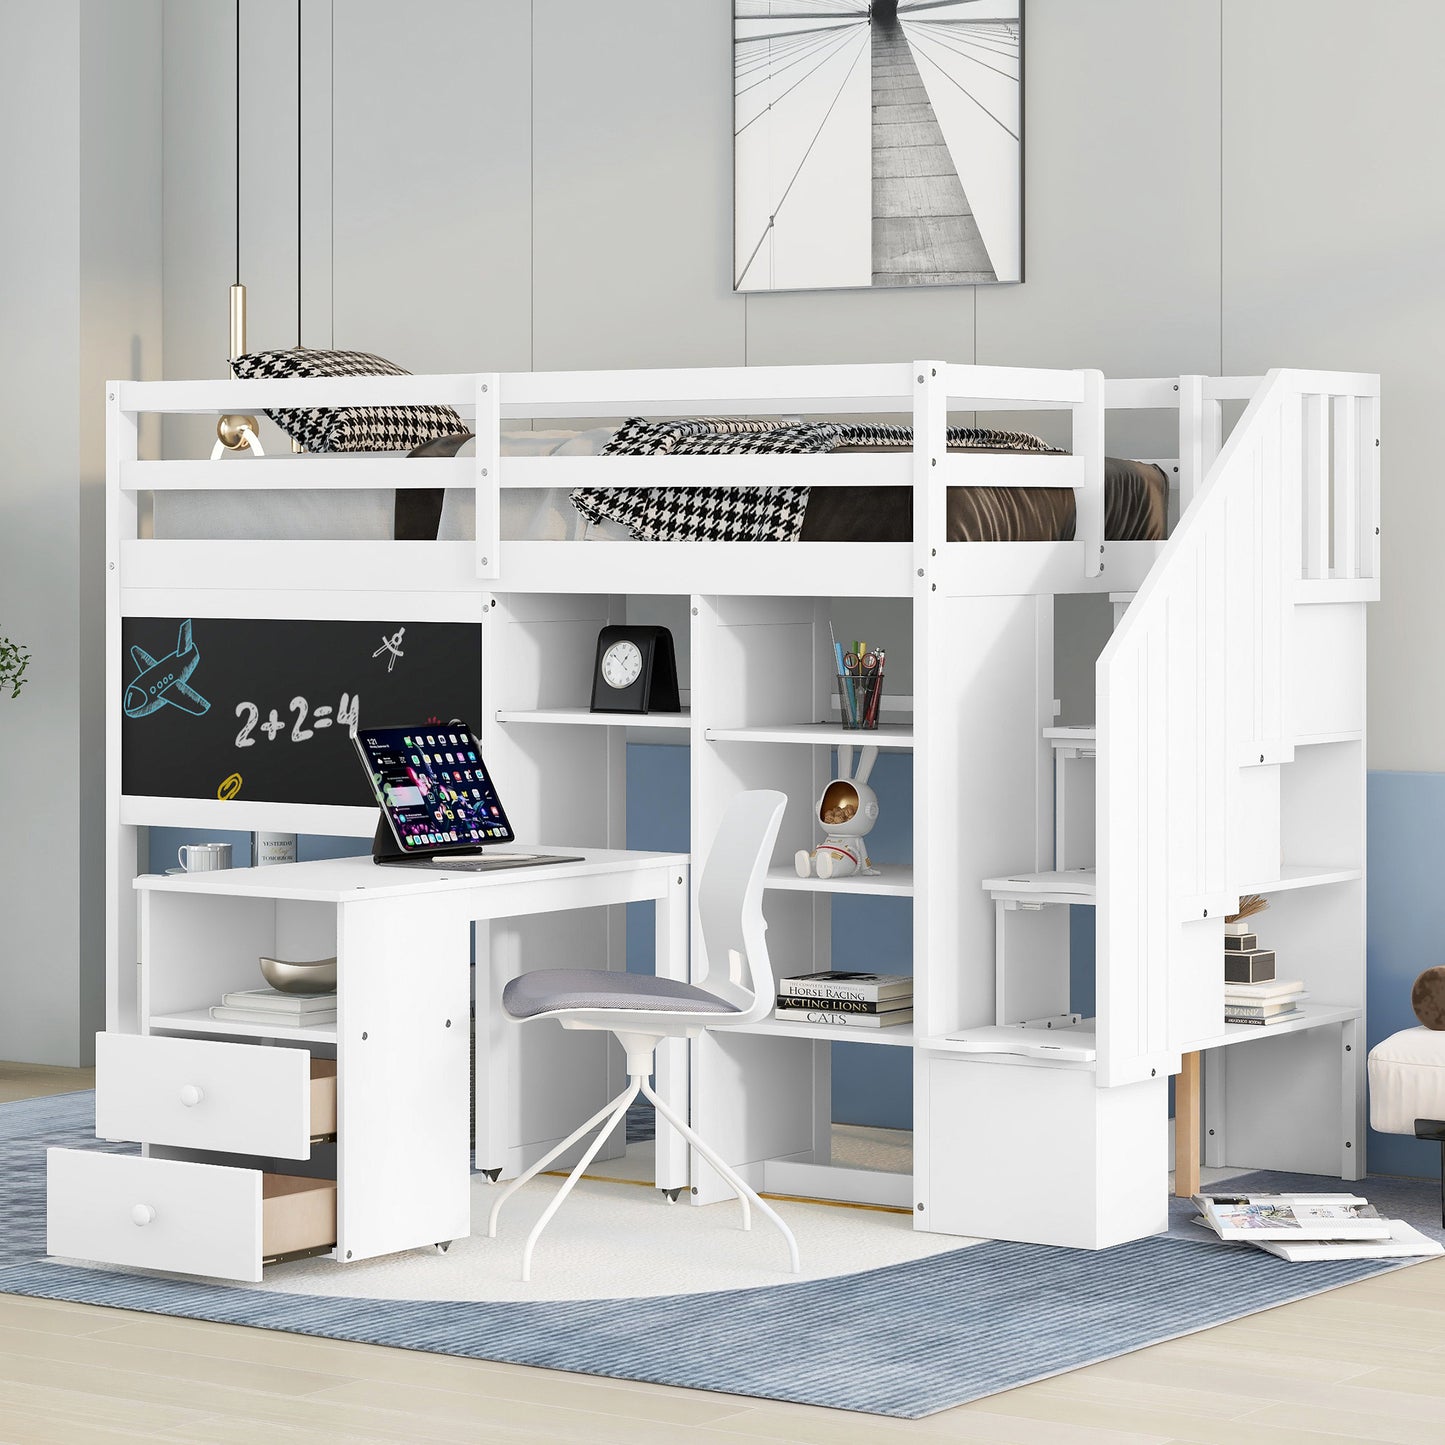 Twin Size Loft Bed with Pullable Desk and Storage Shelves,Staircase and Blackboard,White